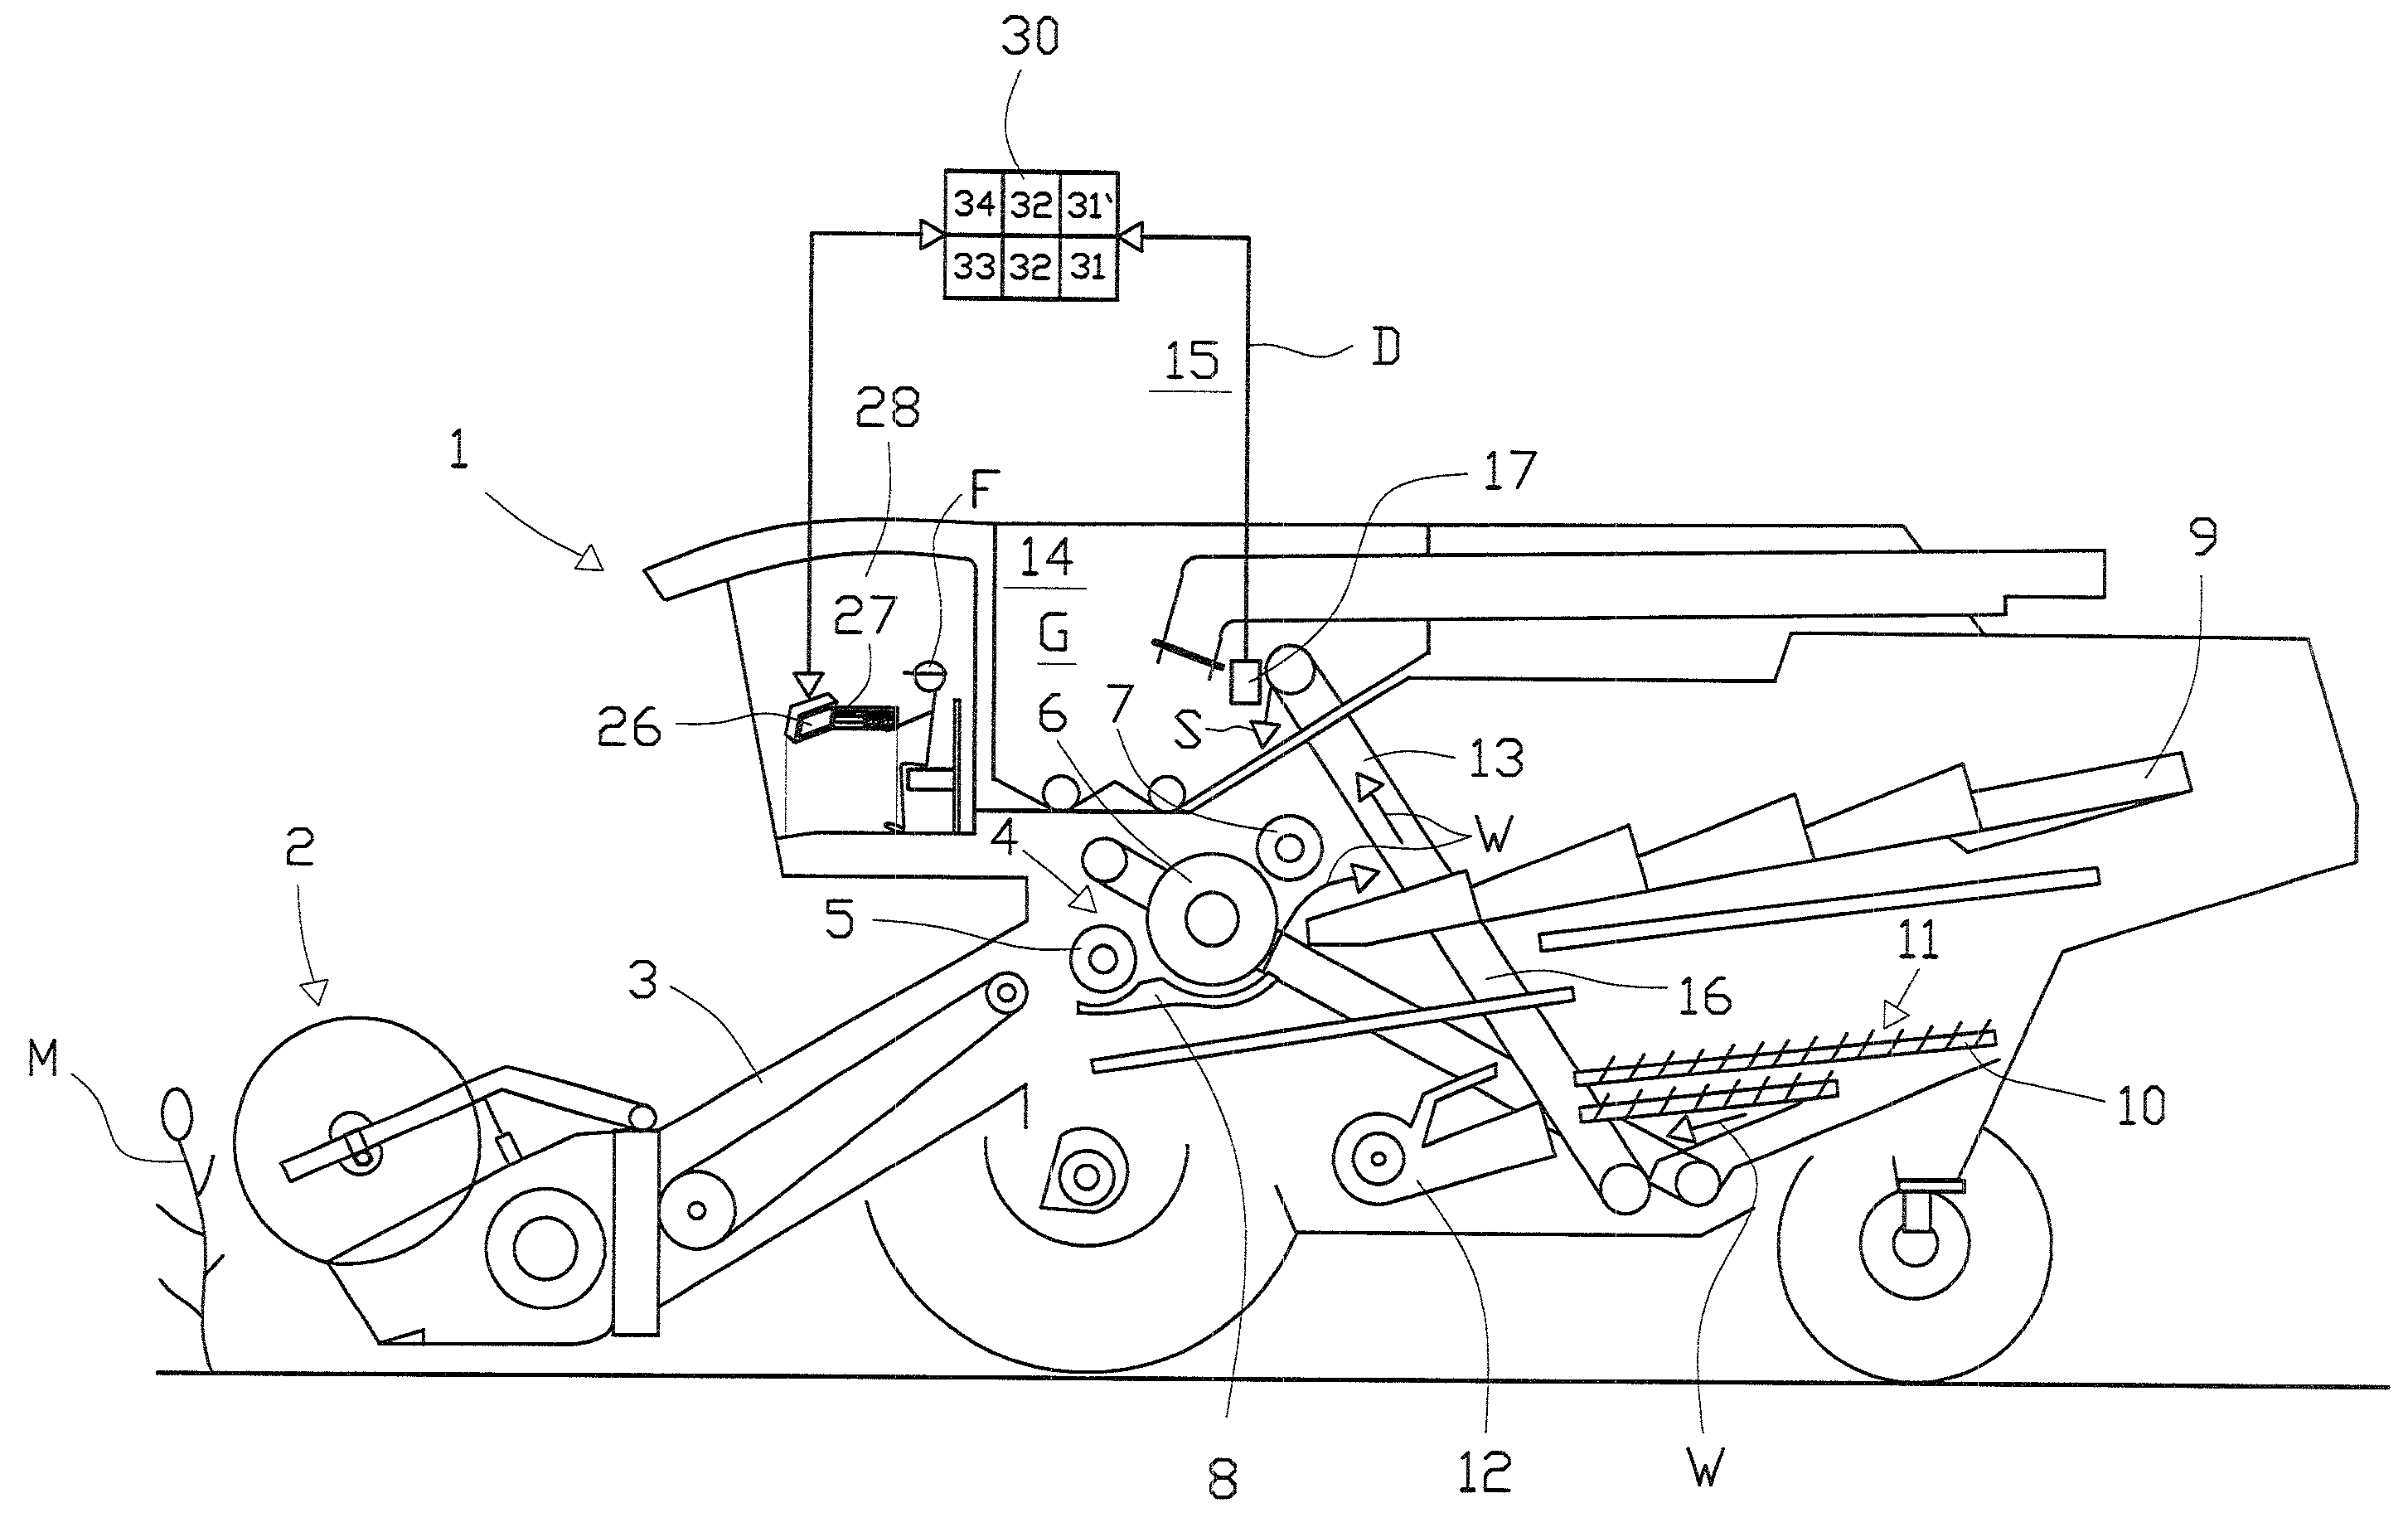 Device for detection and determination of the composition of bulk material